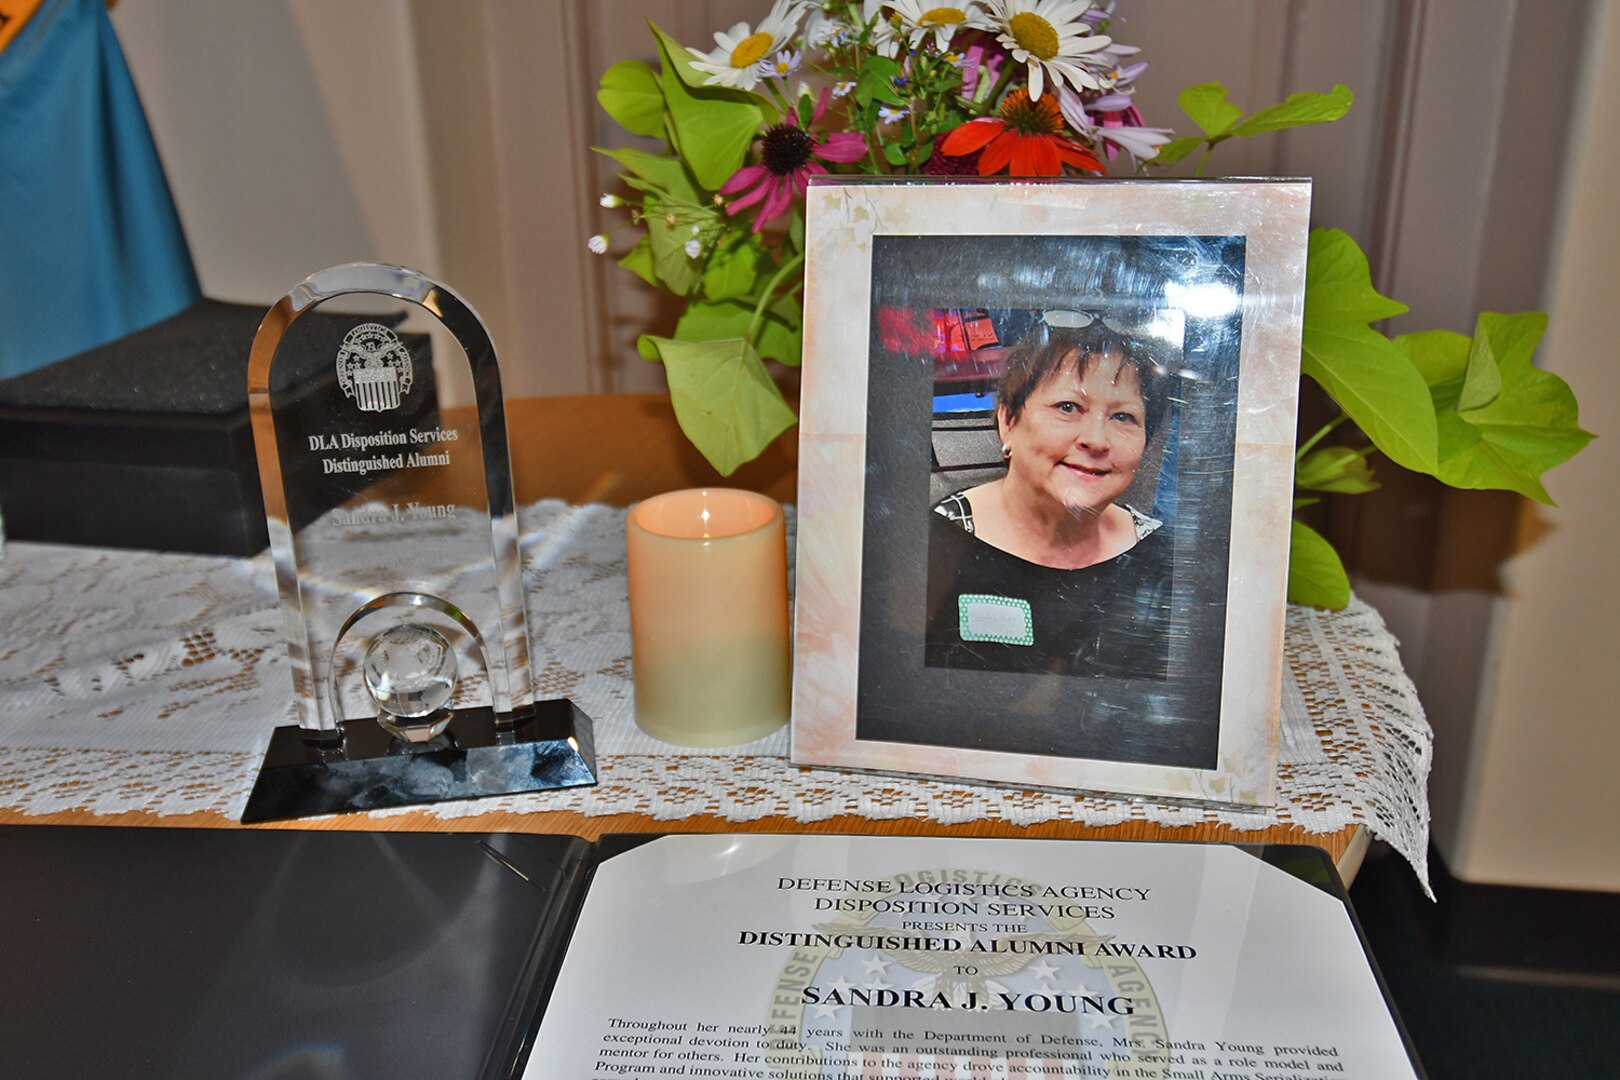 Flowers, a photo, an award citation and a plaque sit on a table with a candle.